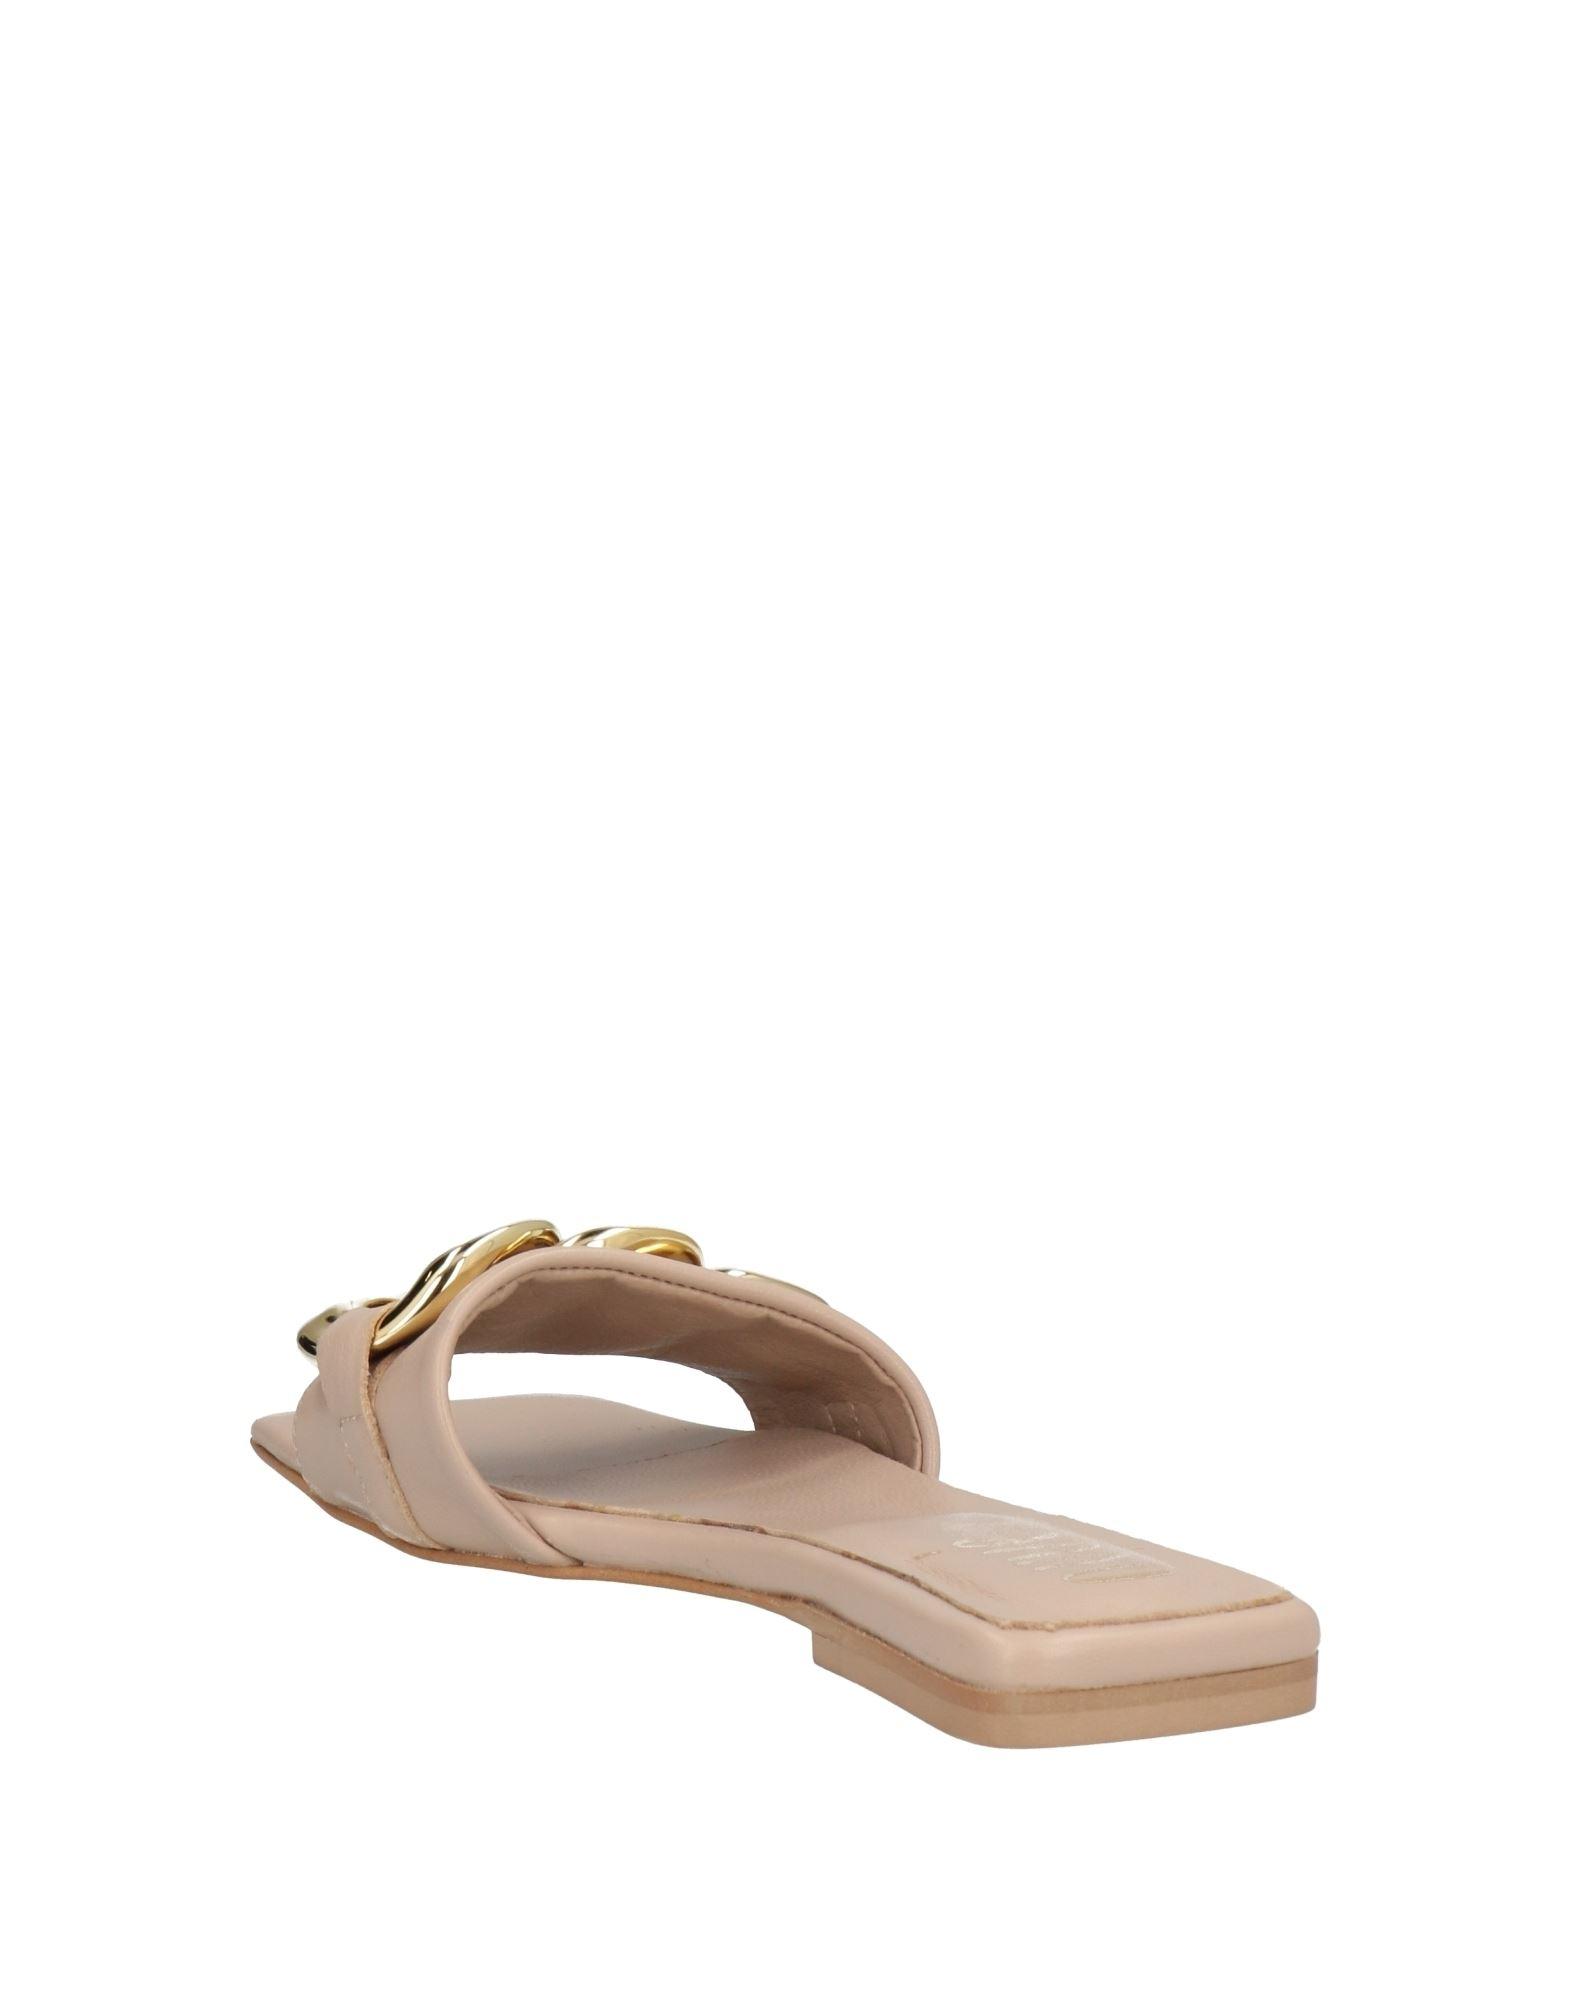 Ovye' By Cristina Lucchi Sandals in Natural | Lyst